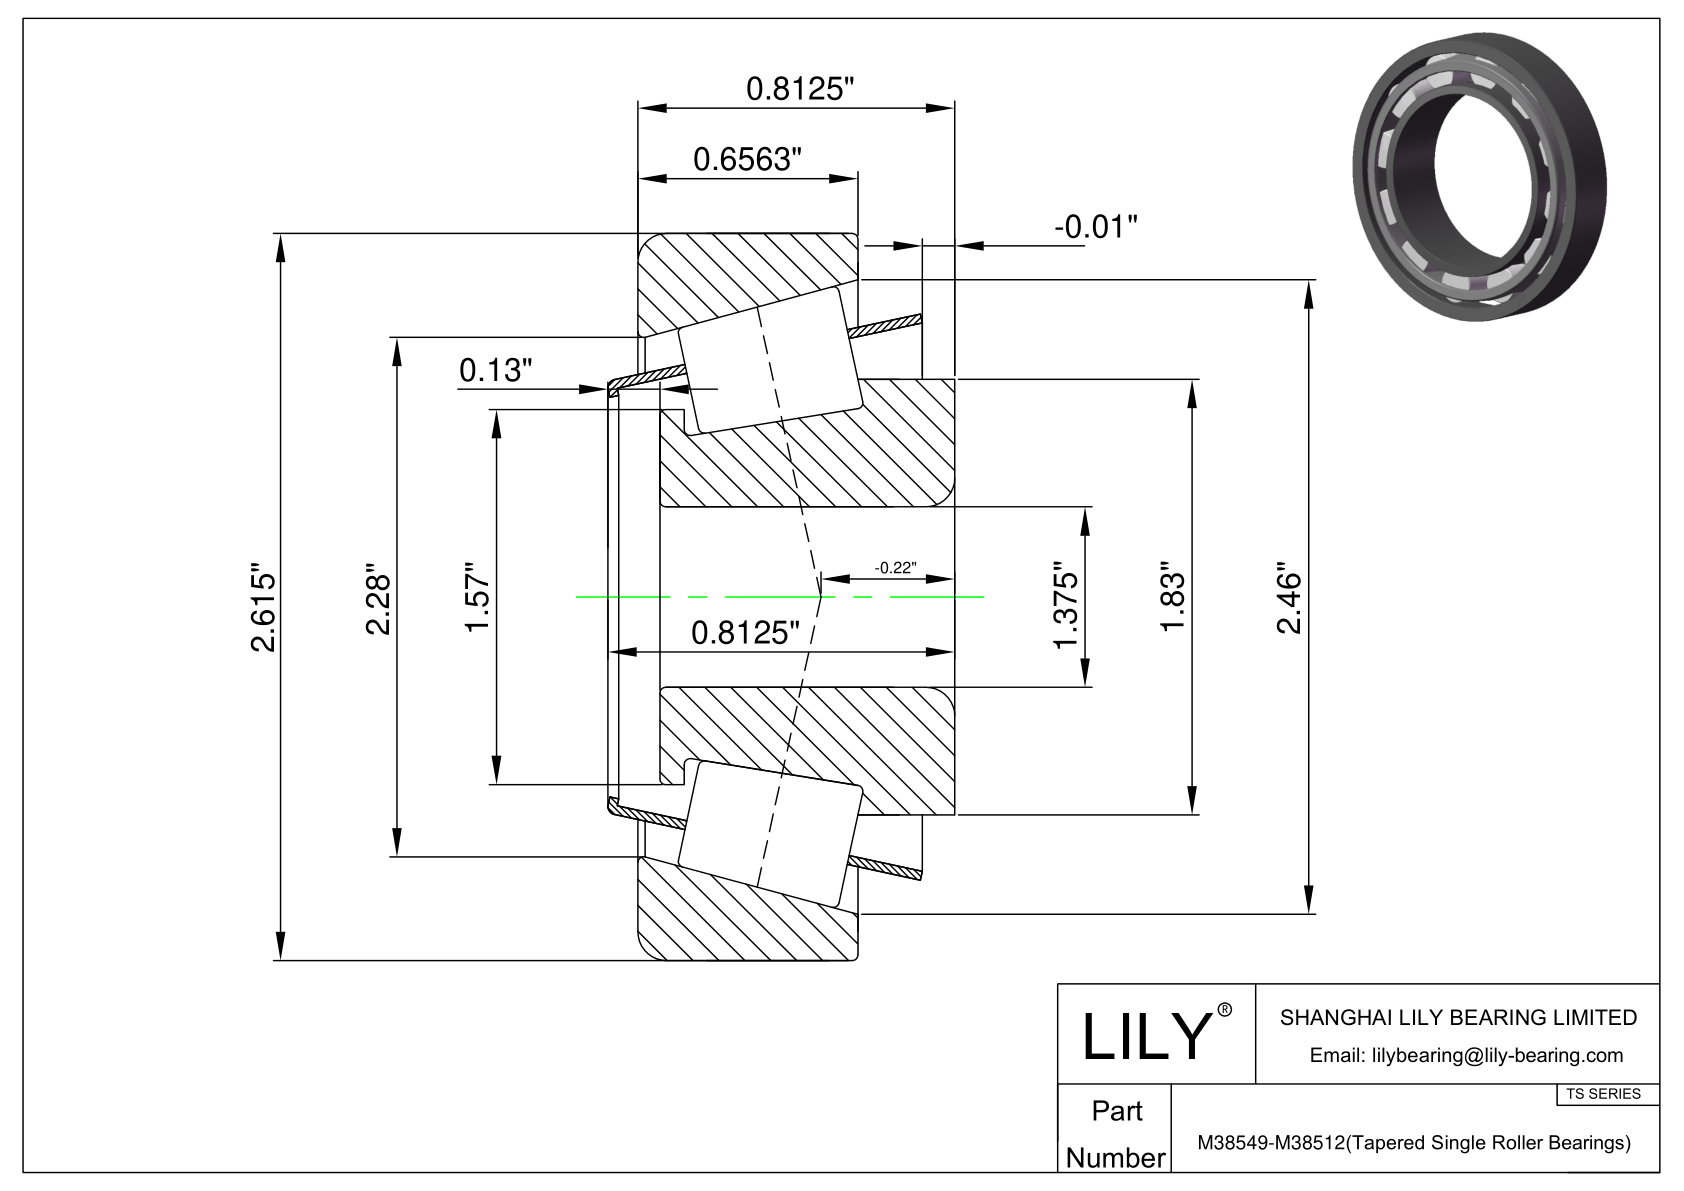 M38549-M38512 TS (Tapered Single Roller Bearings) (Imperial) cad drawing